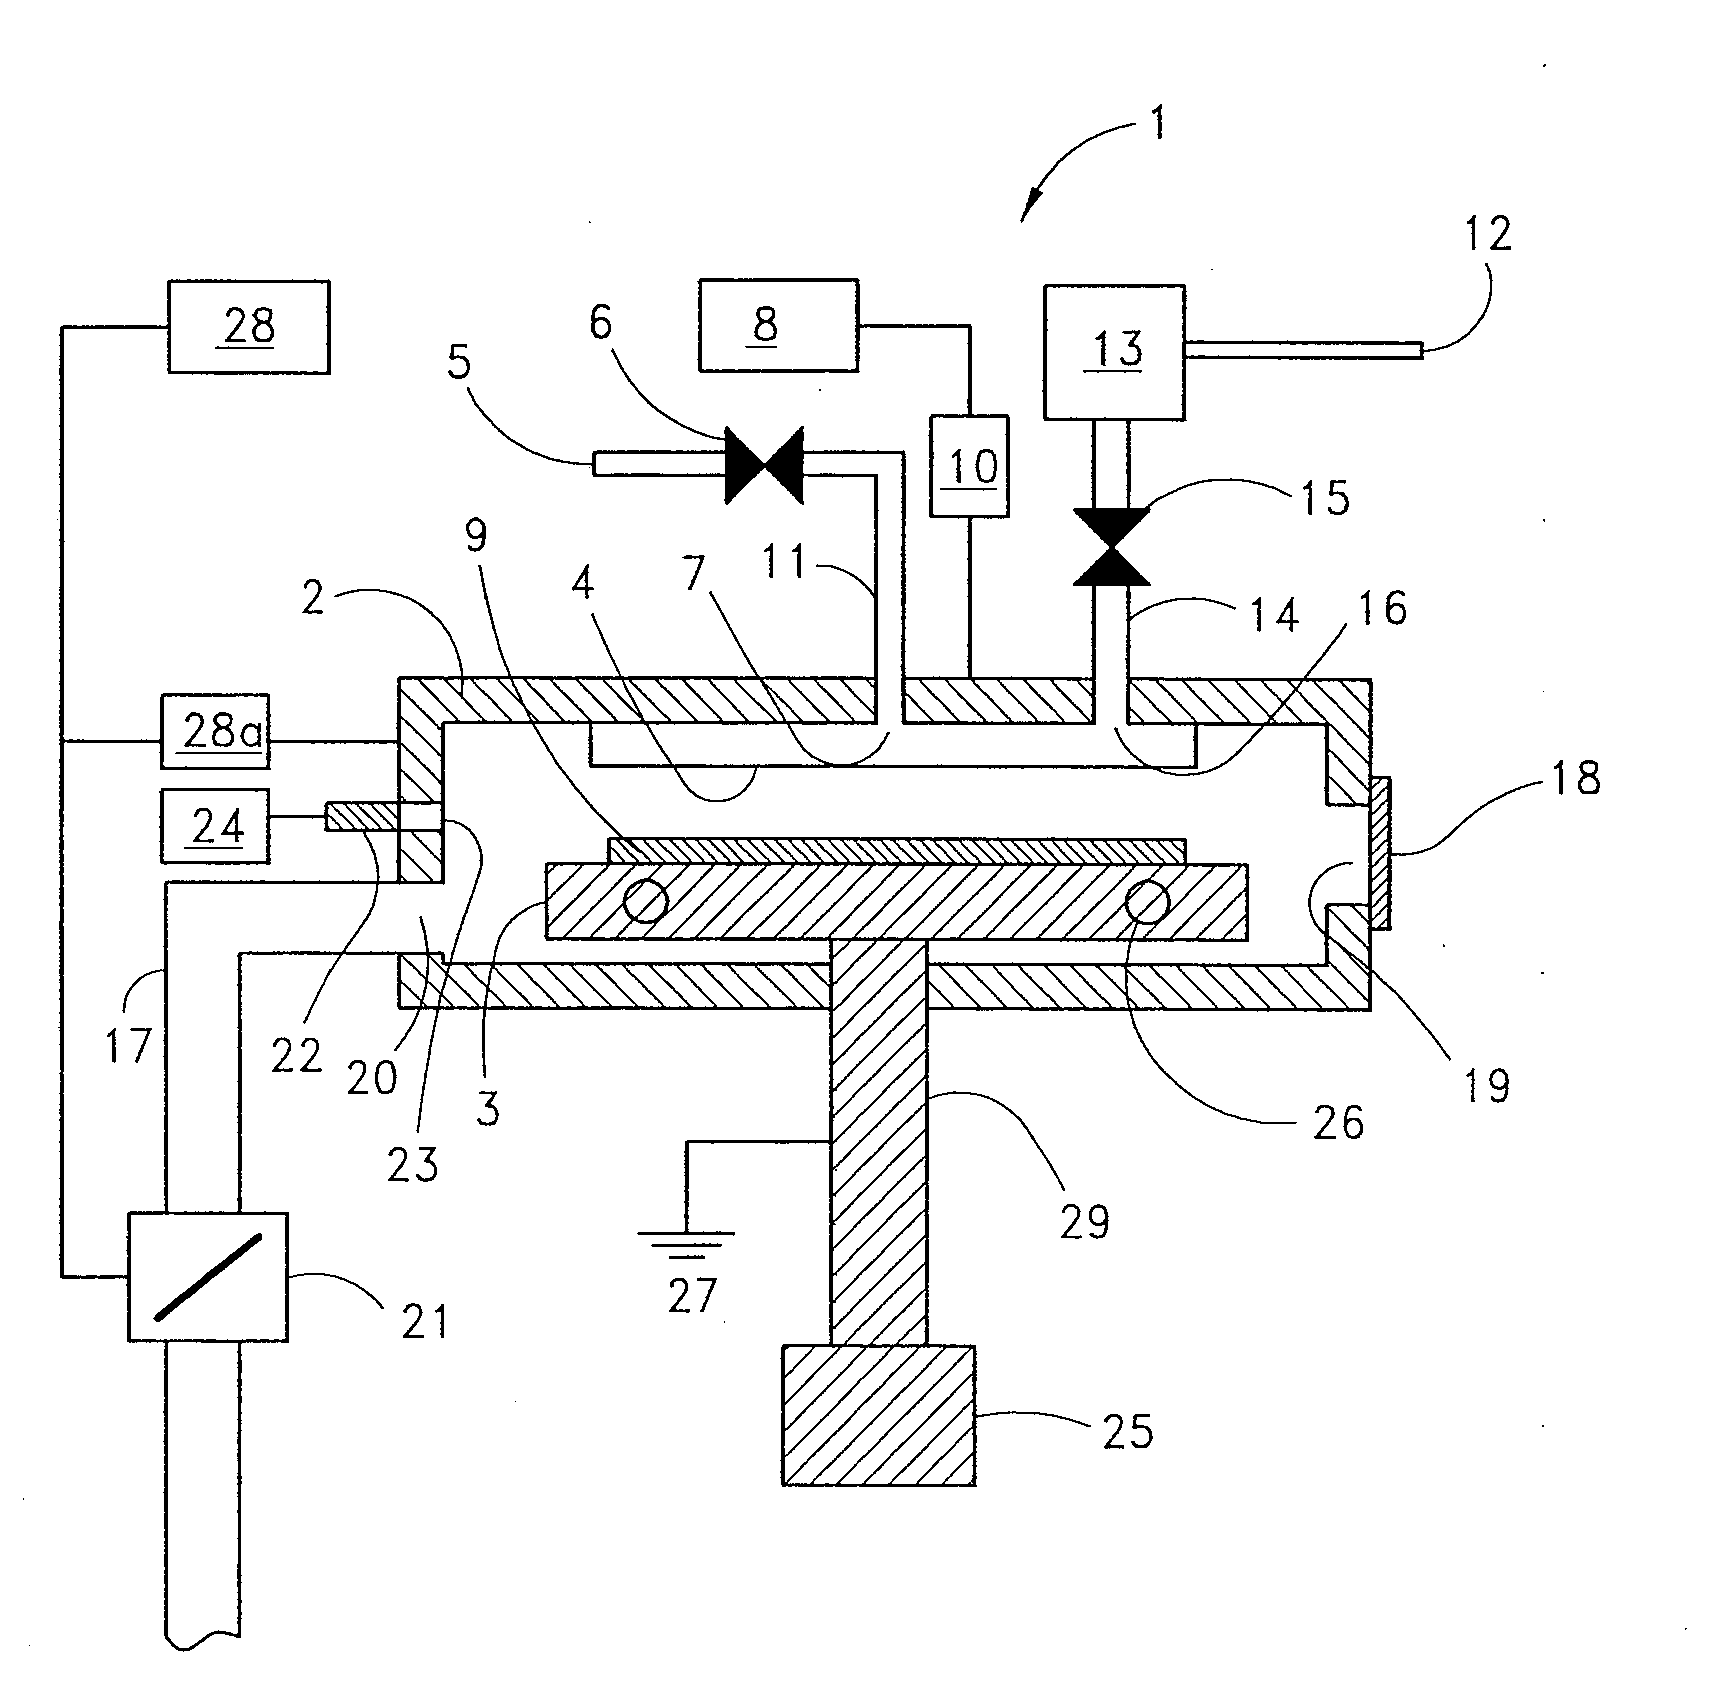 Semiconductor processing with a remote plasma source for self-cleaning